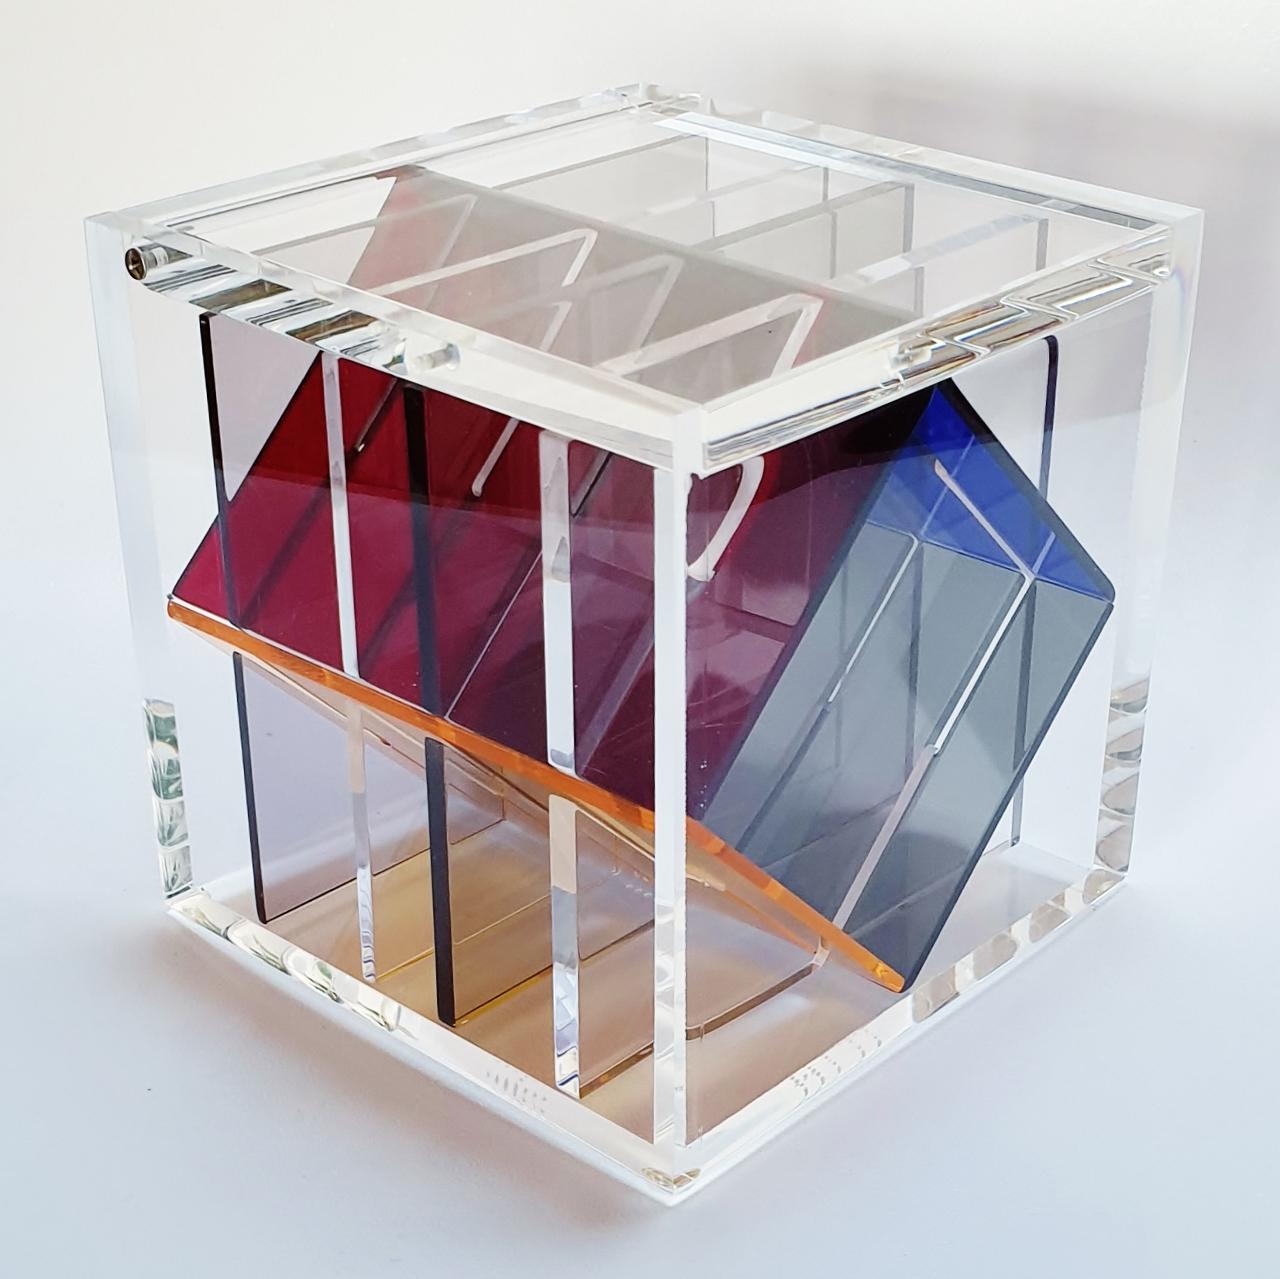 Homage to Van Doesburg - contemporary modern abstract geometric cube sculpture - Contemporary Sculpture by Haringa + Olijve